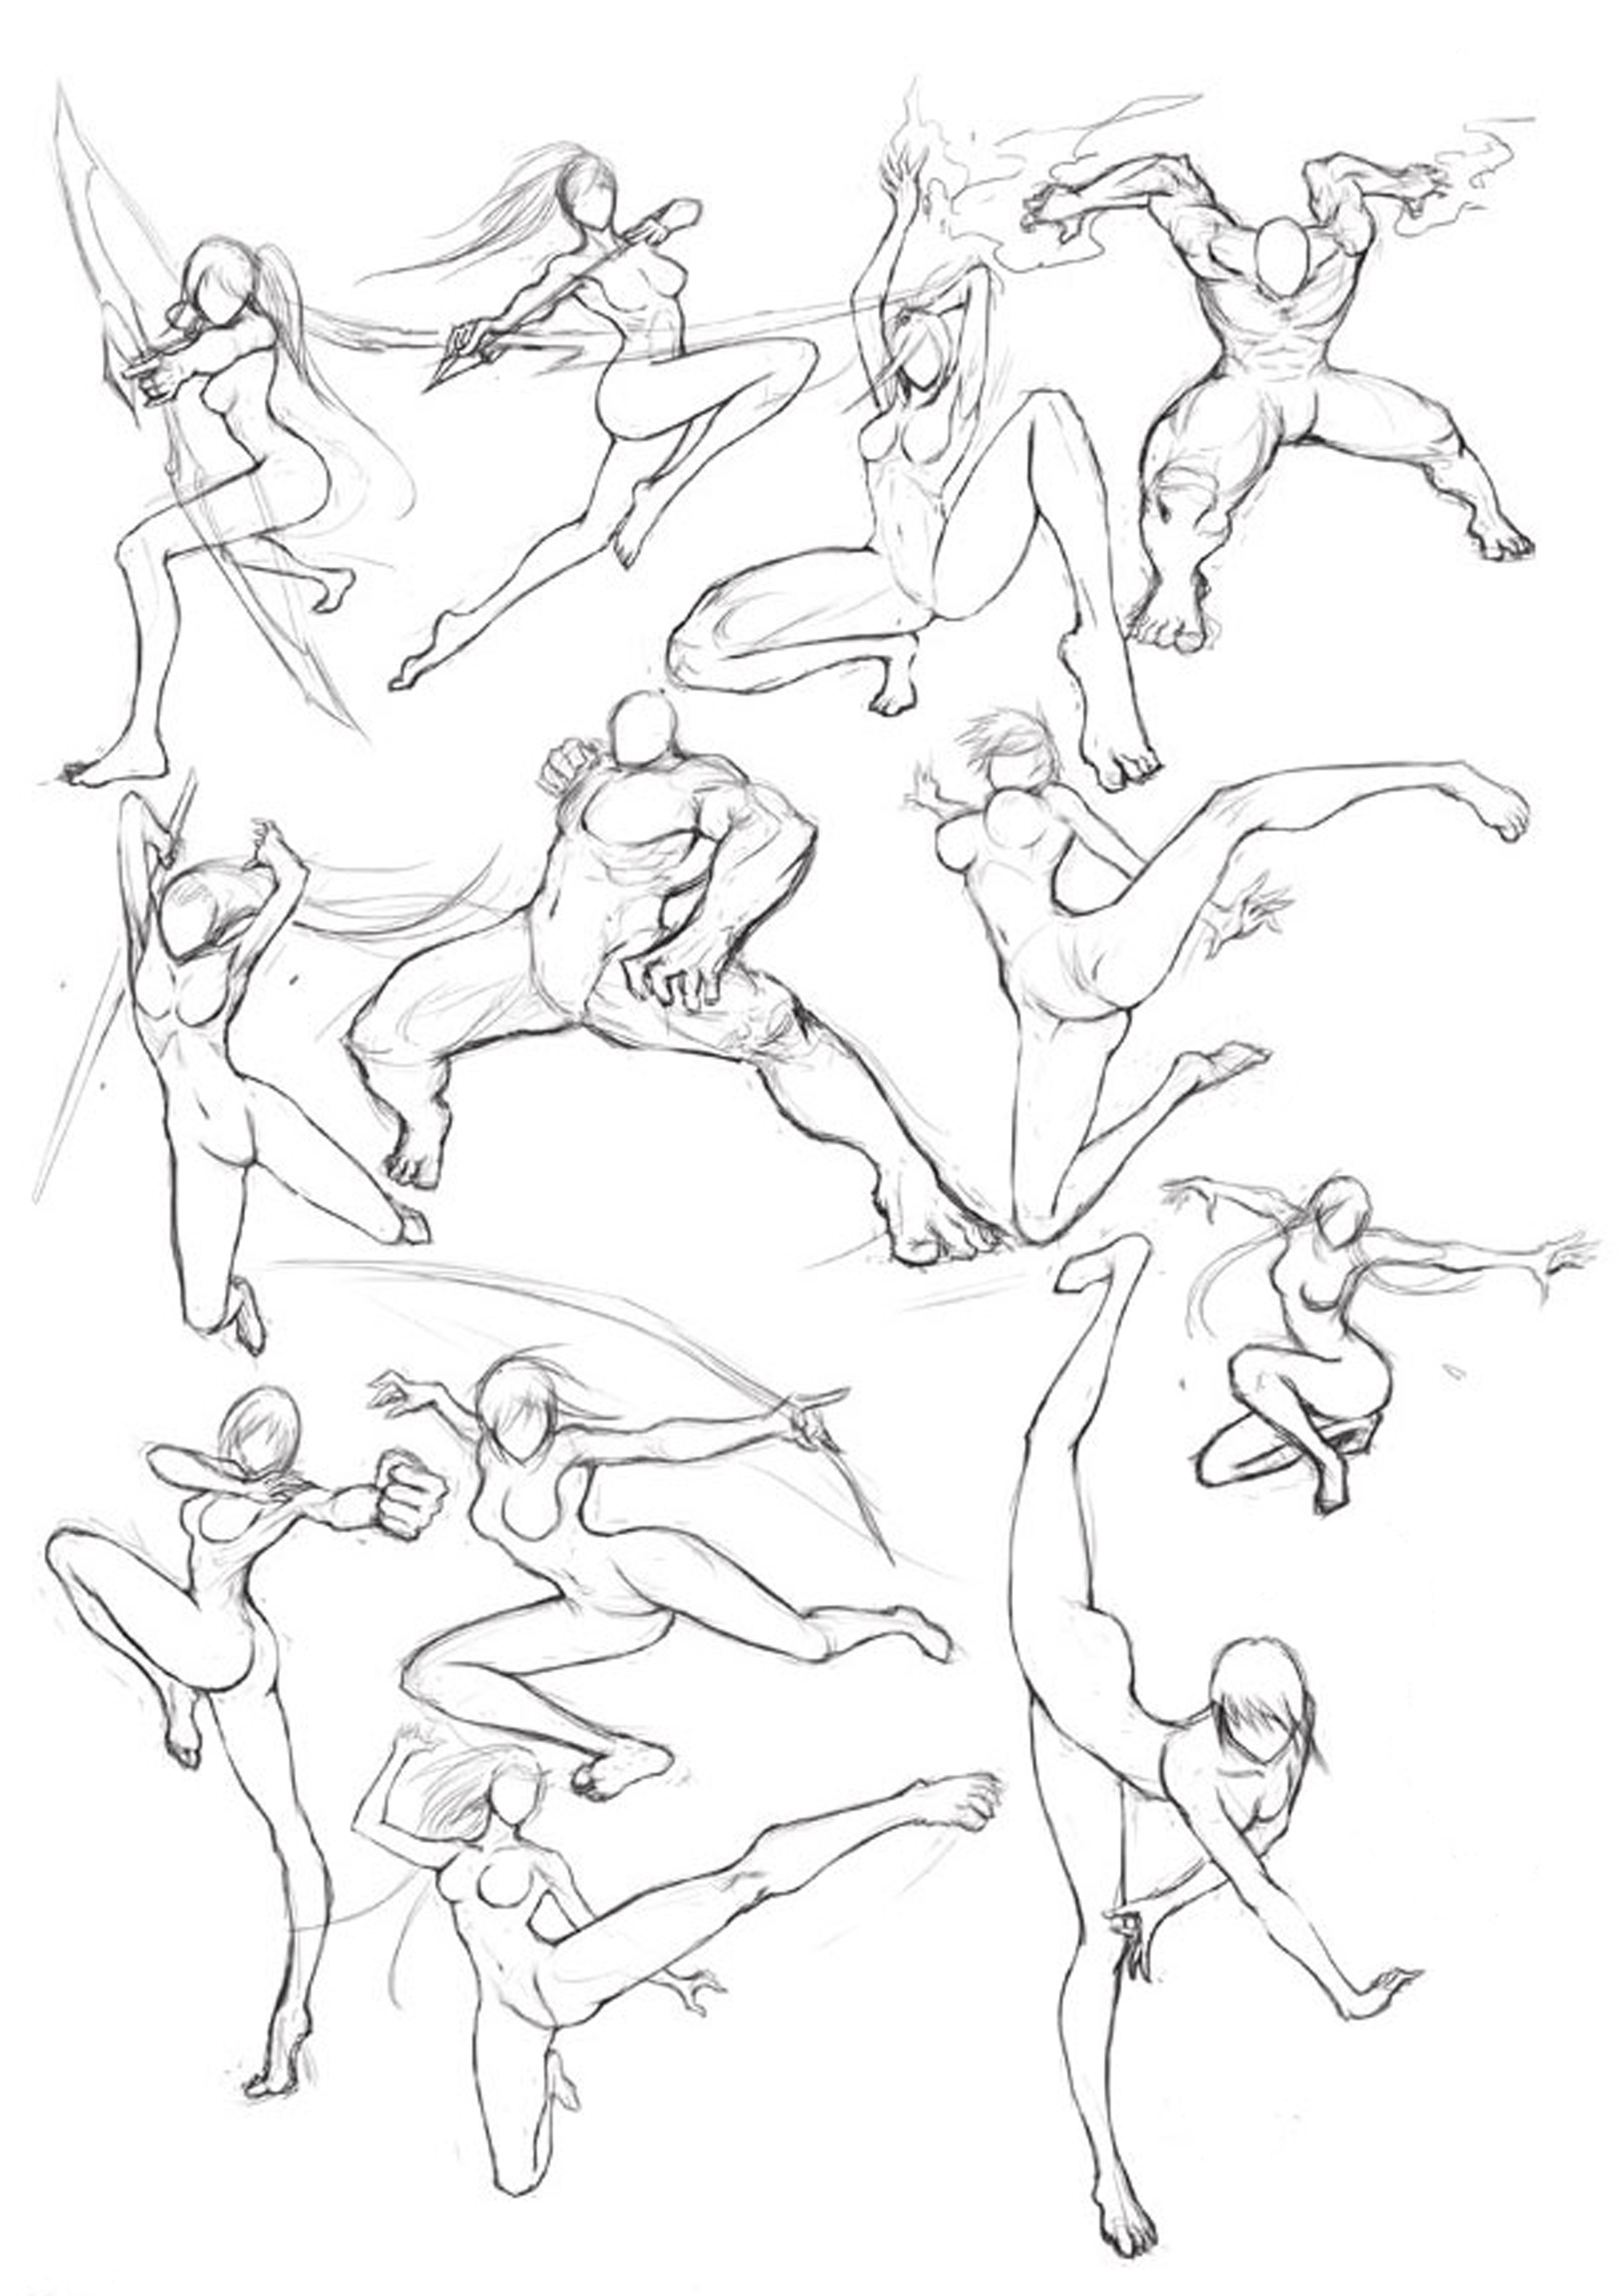 Creative Poses Drawing Sketch with Realistic